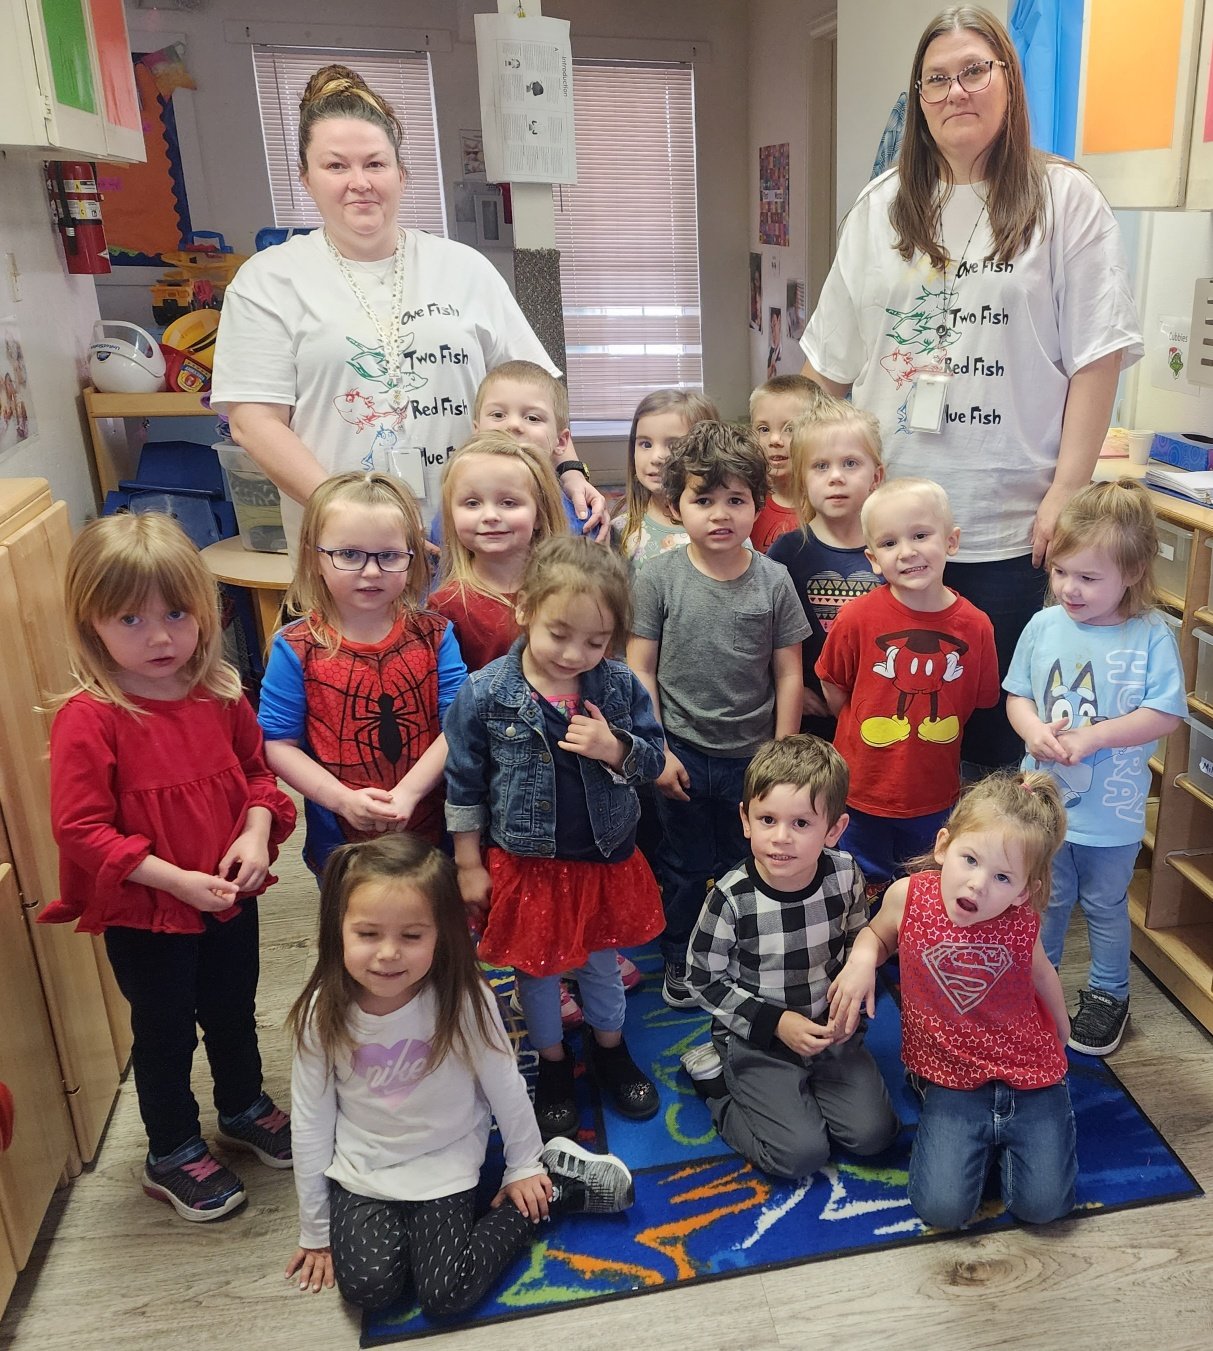  Ms. Beeson reported, "Mangum 3 year olds celebrated Dr. Seuss week and Thursday was One fish, two fish, red fish blue fish wear red and blue and Friday was wear favorite pj's. We also painted hand prints of Thing 1 and Thing 2." 